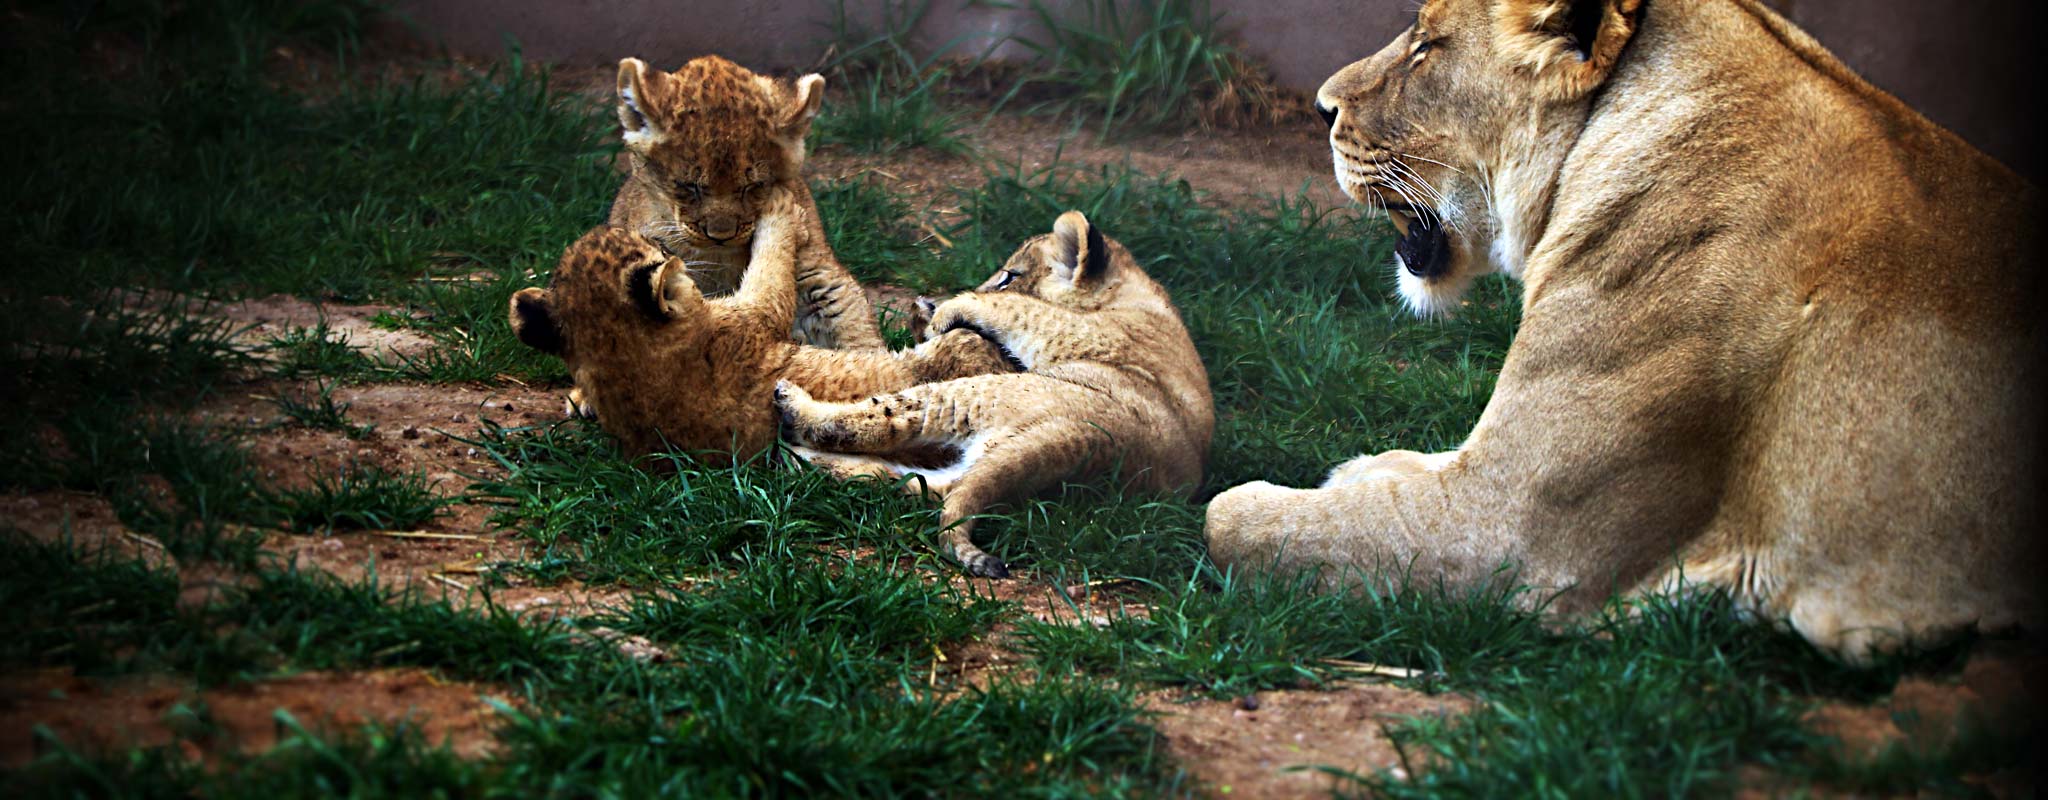 Three lion cubs play near their mother in Hogle Zoo.